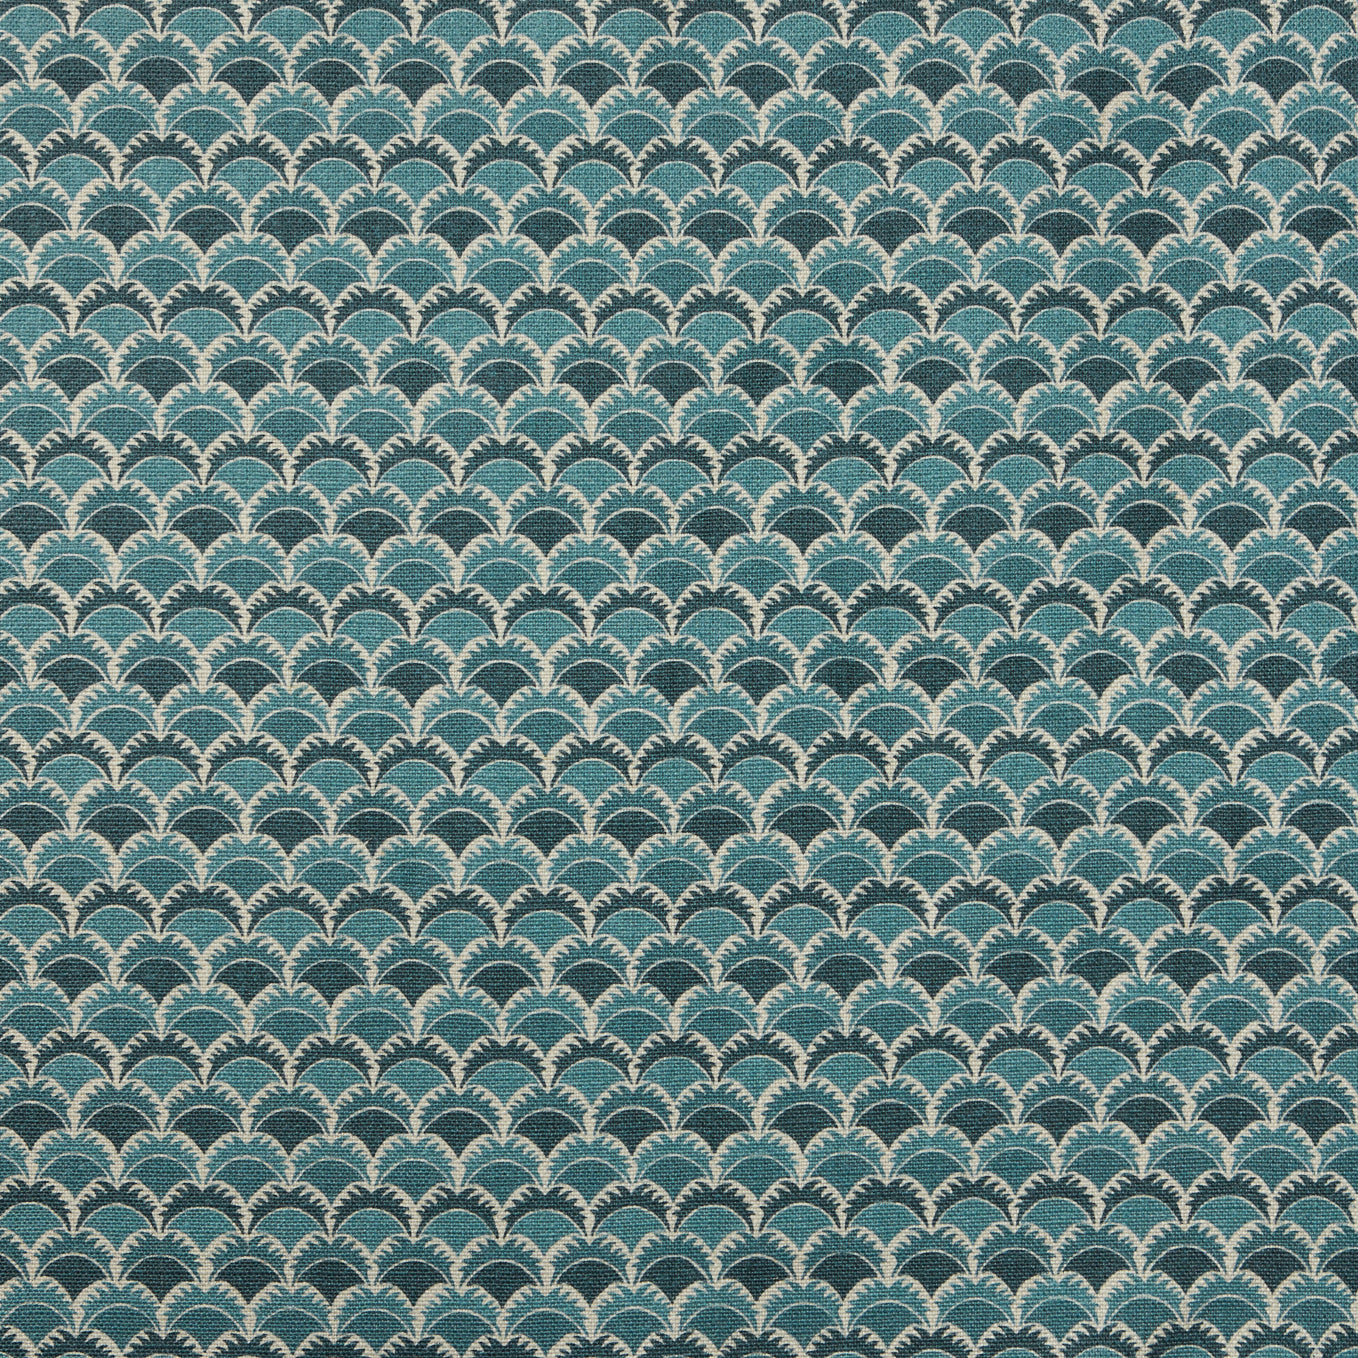 Swatch of fabric with a repeating Japanese-inspired scalloped pattern in shades of blue, navy and tan.